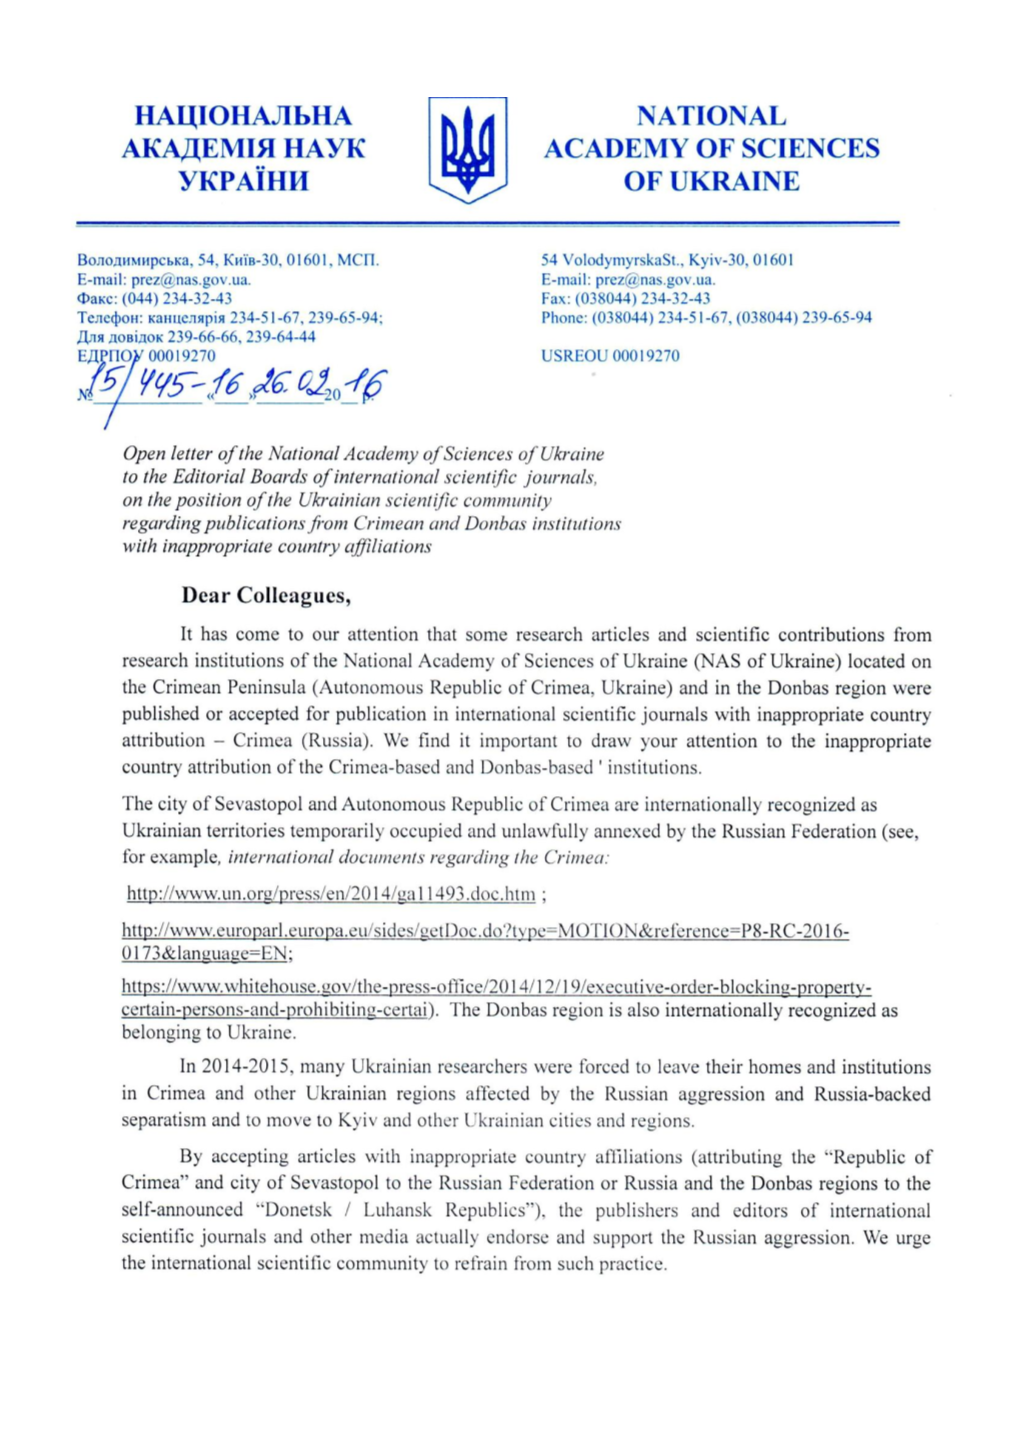 Open Letter of the National Academy of Sciences of Ukraine